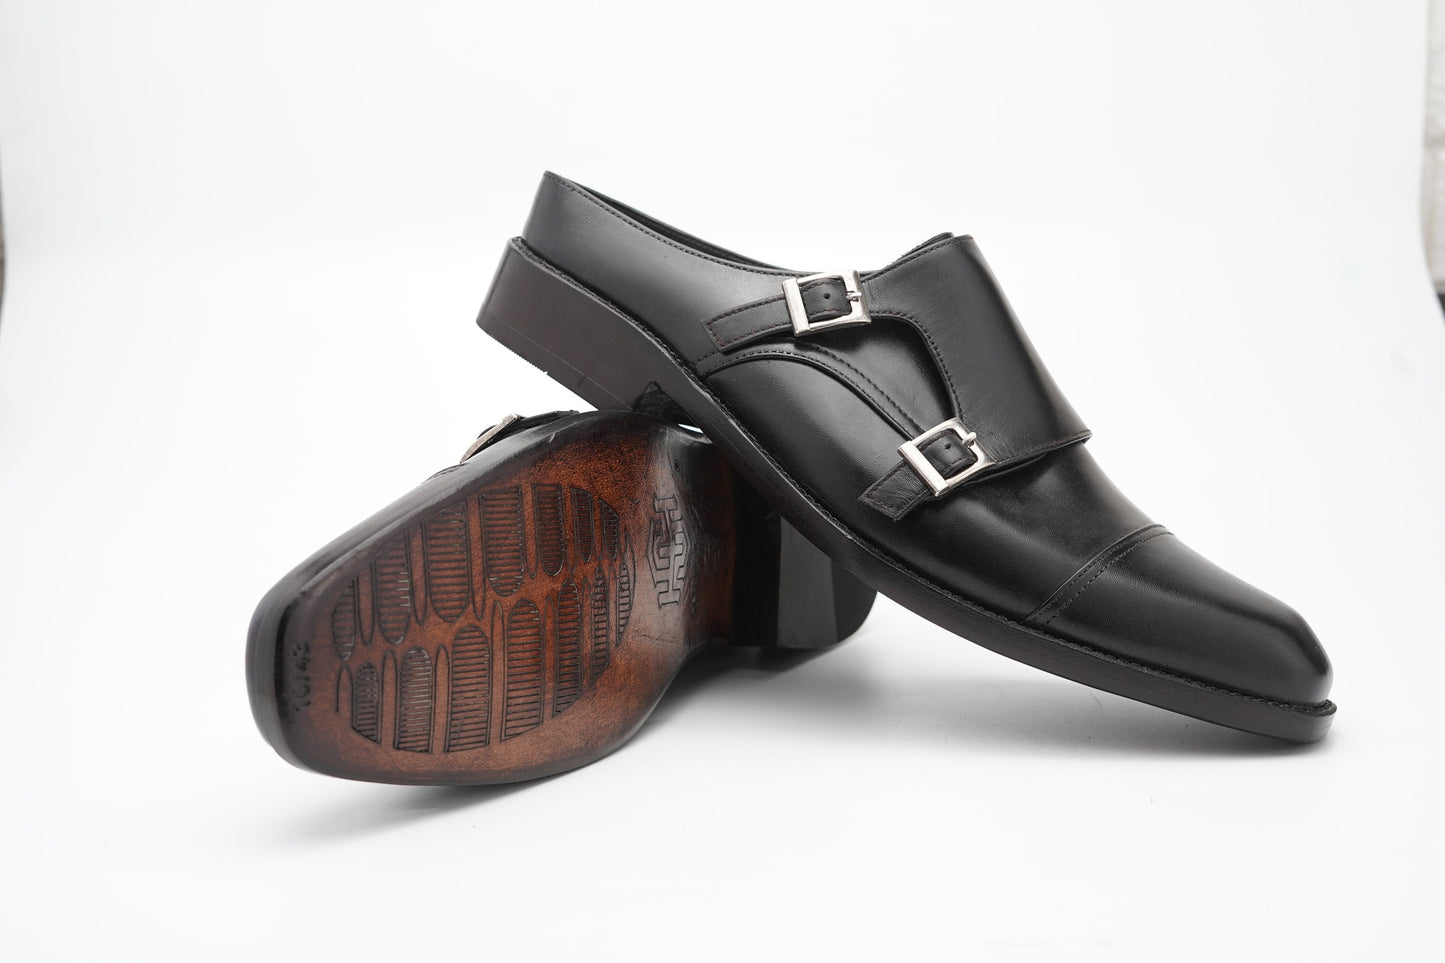 Black backless Double Buckle loafer Slip On Mule Custom Made-To-Order Shoes Premium Quality Handmade using Full Grain Aniline Leather Woozy Store